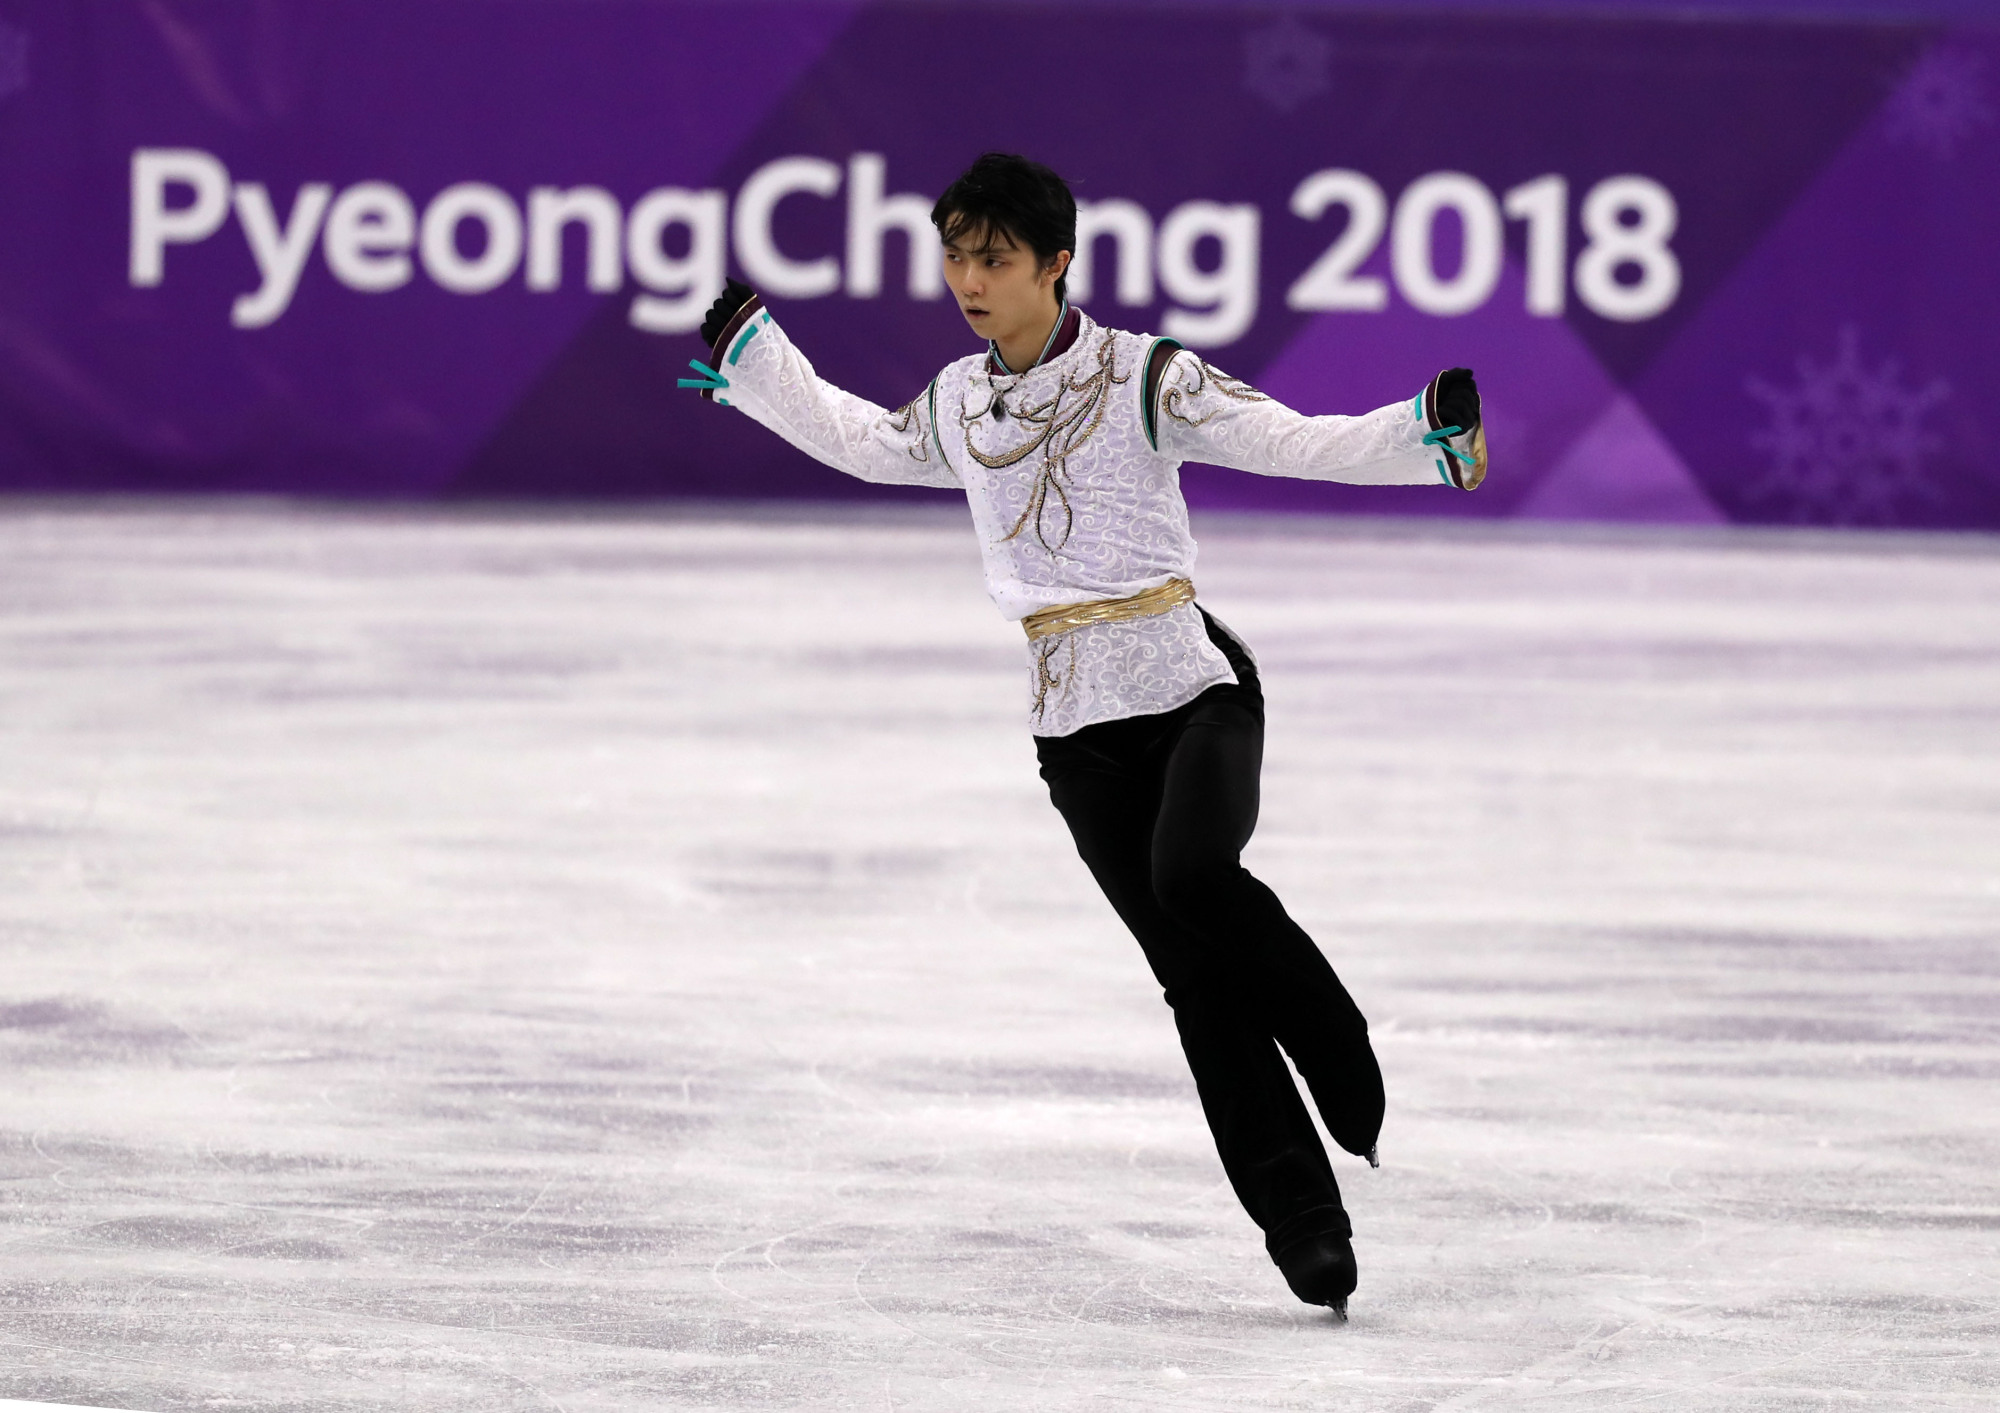 Yuzuru Hanyu became the first man in 66 years to defend the Olympic title when he won the gold medal at the Pyeongchang Olympics. His coach Brian Orser said in a recent interview that Hanyu is the greatest skater of all time. | SIPA USA VIA AP